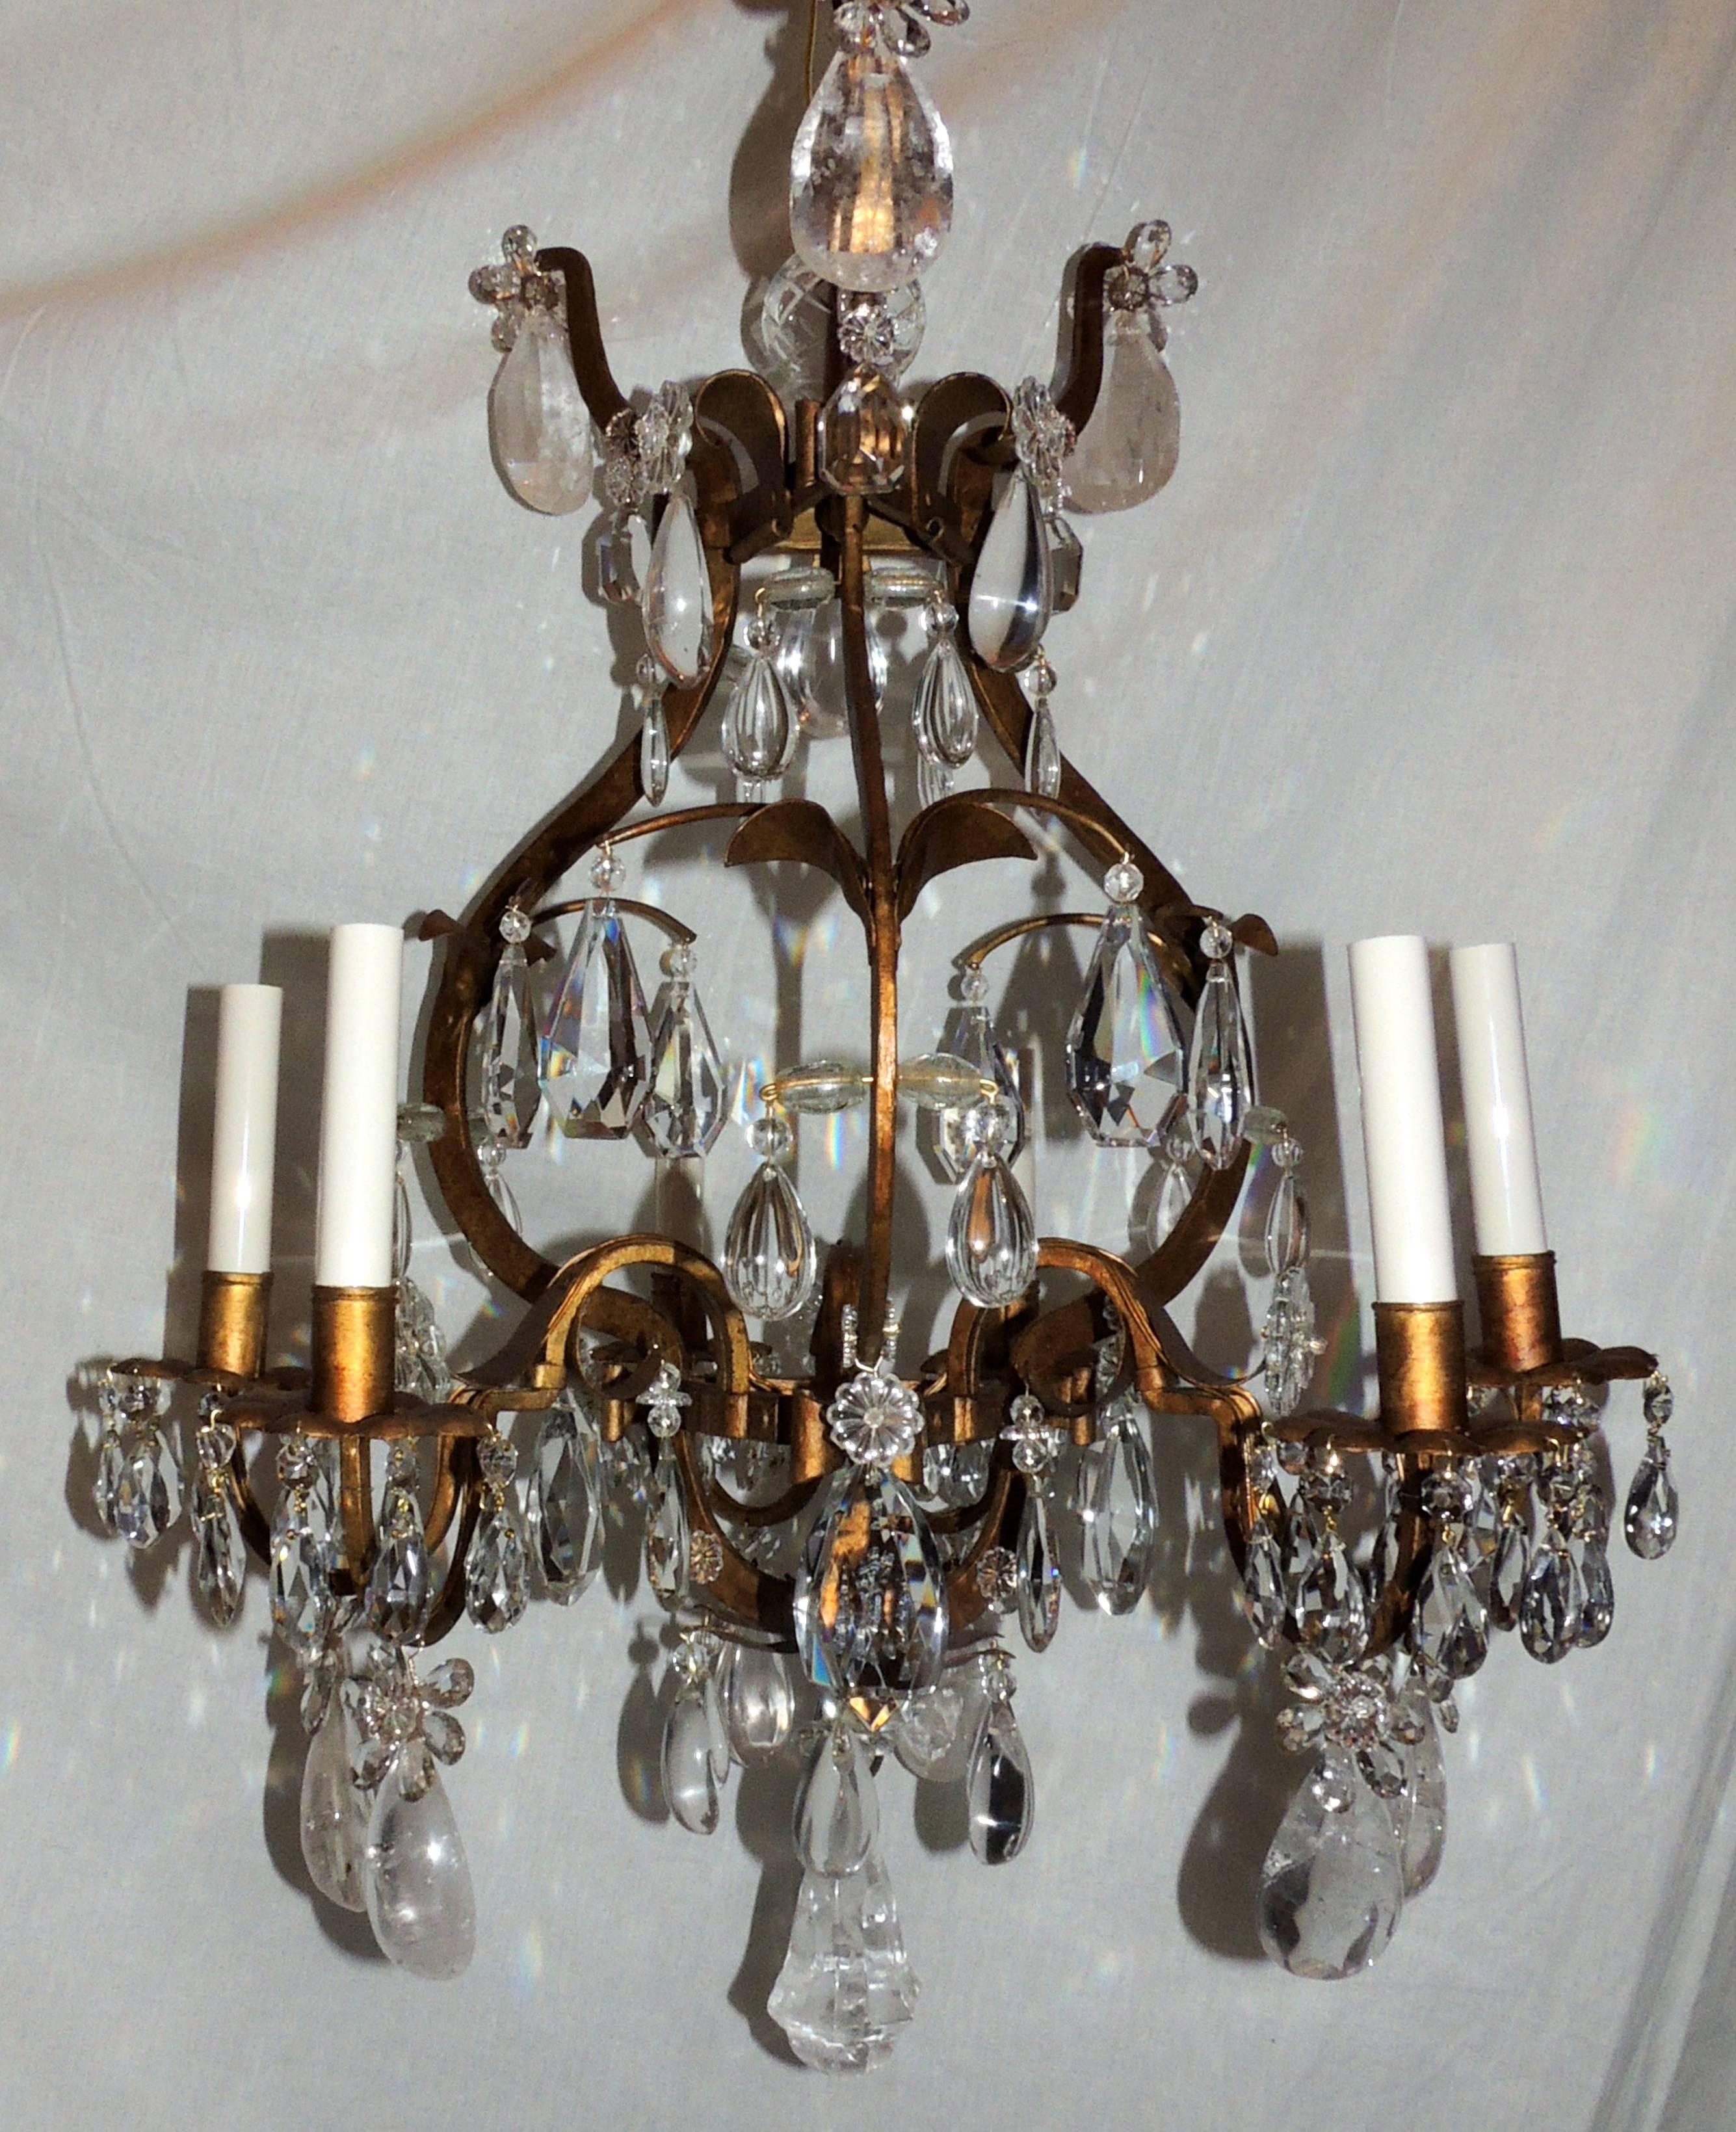 Gold Gilt Rock Crystal Bagues Chandelier Mid-Century Modern Light Flower Fixture In Good Condition For Sale In Roslyn, NY